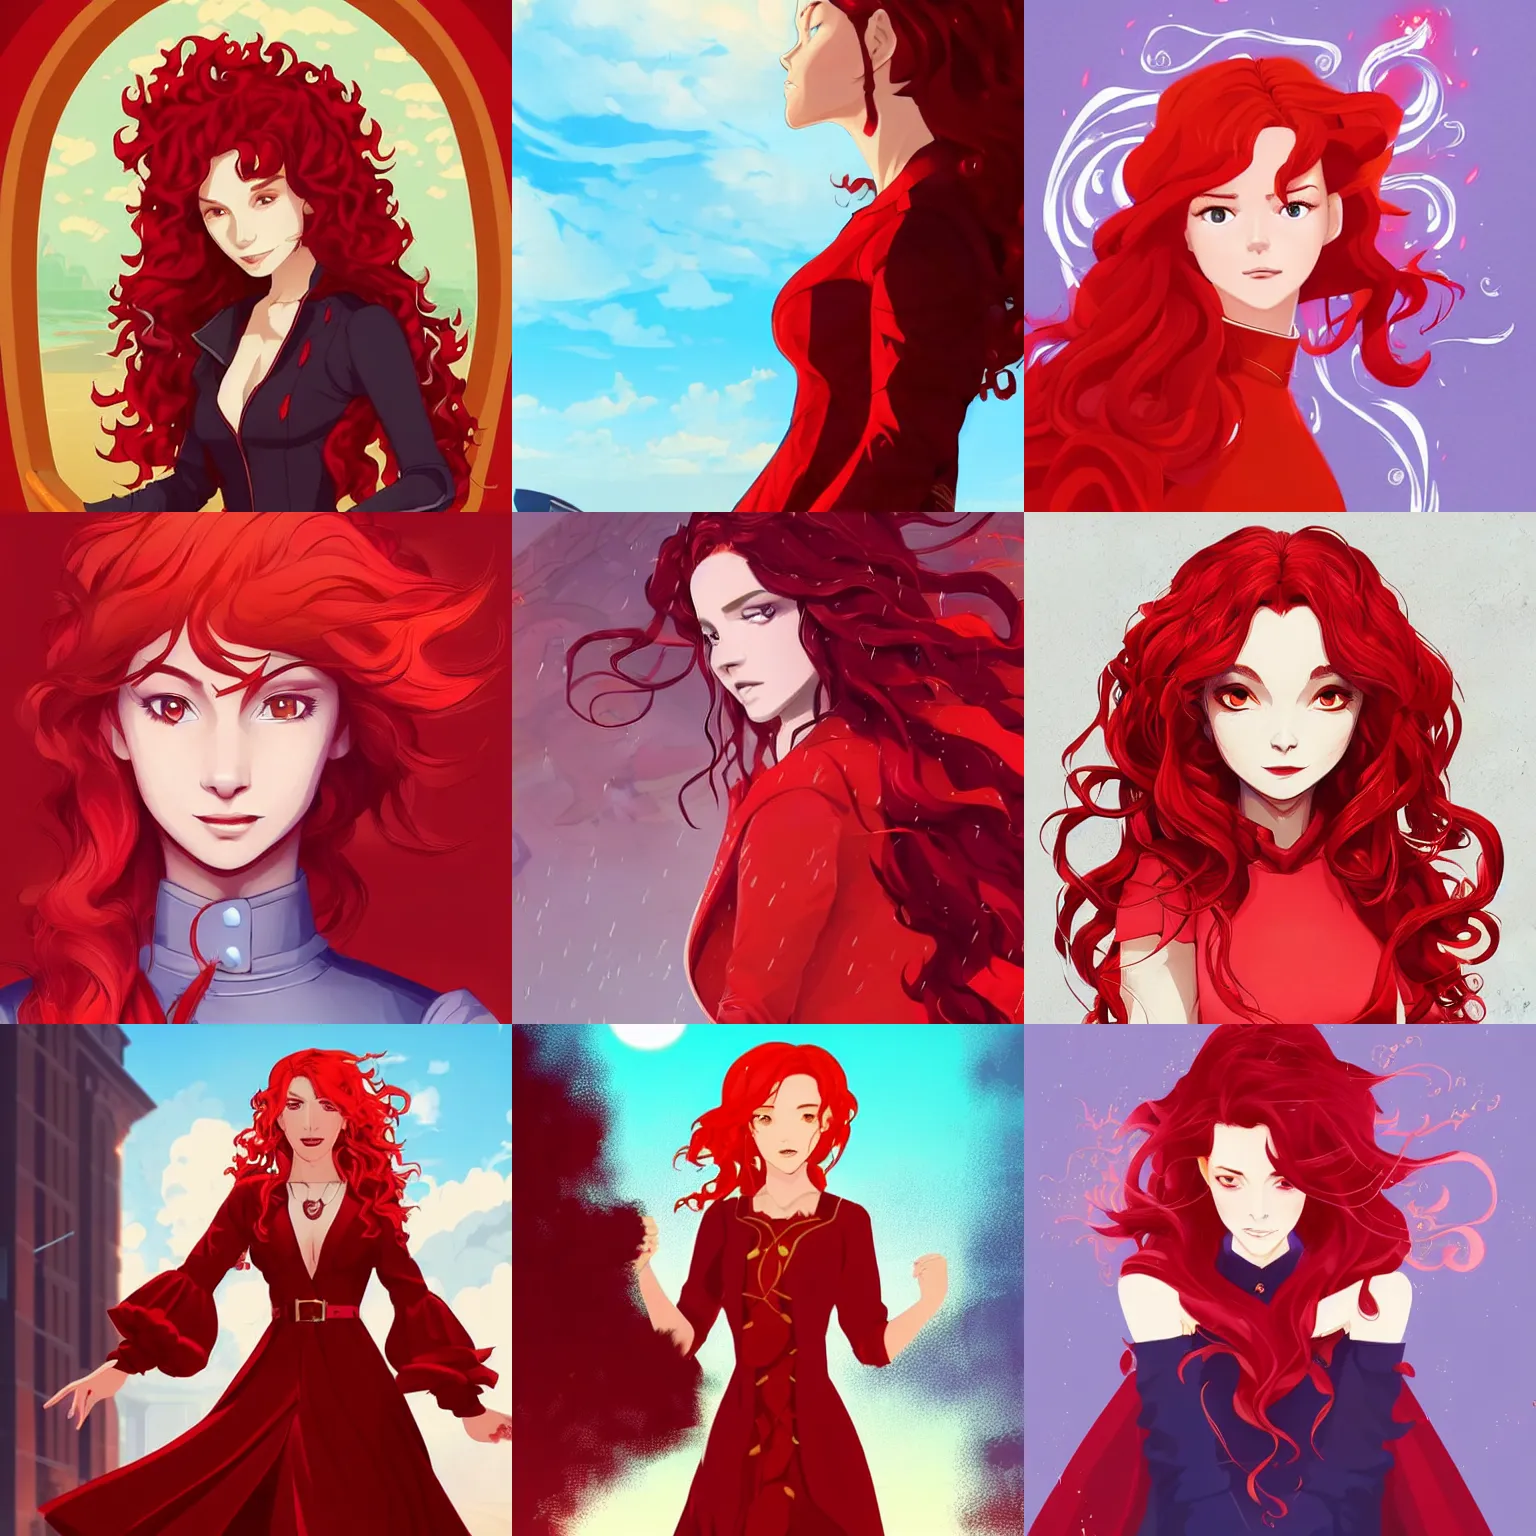 Prompt: portrait of a female draconic sorceress with curly red hair wearing a red dress and a red coat, clean cel shaded vector art. shutterstock. behance hd by lois van baarle, artgerm, helen huang, by makoto shinkai and ilya kuvshinov, rossdraws, illustration